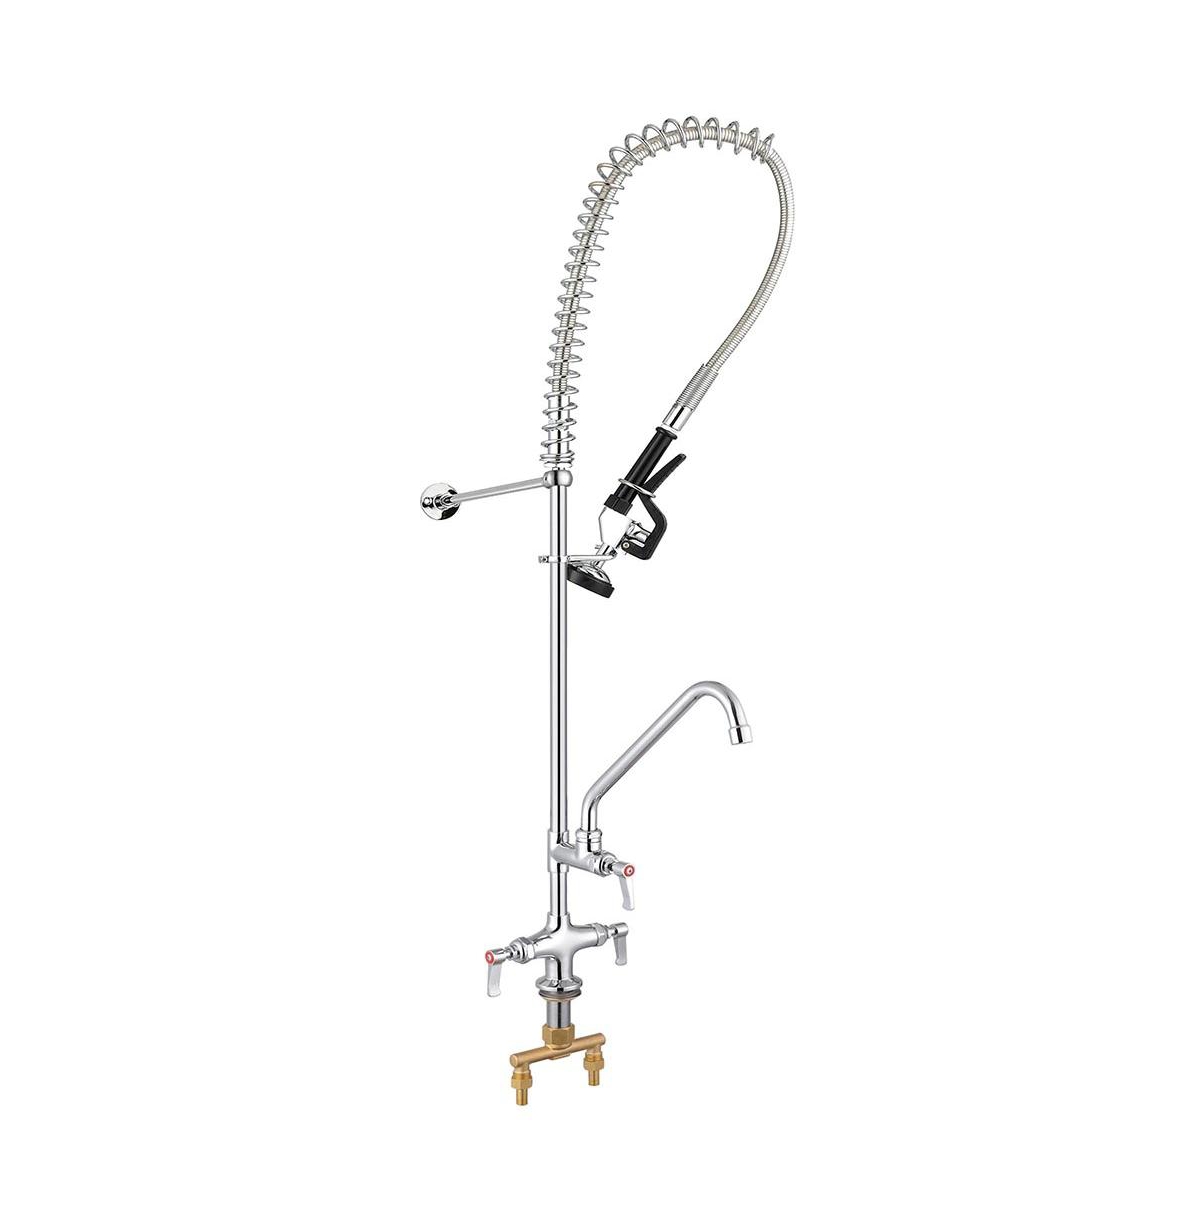 Aquaterior Commercial Restaurant Pre-Rinse Faucet Swivel w/ 12" Add-On Faucet Cupc Nsf - Natural